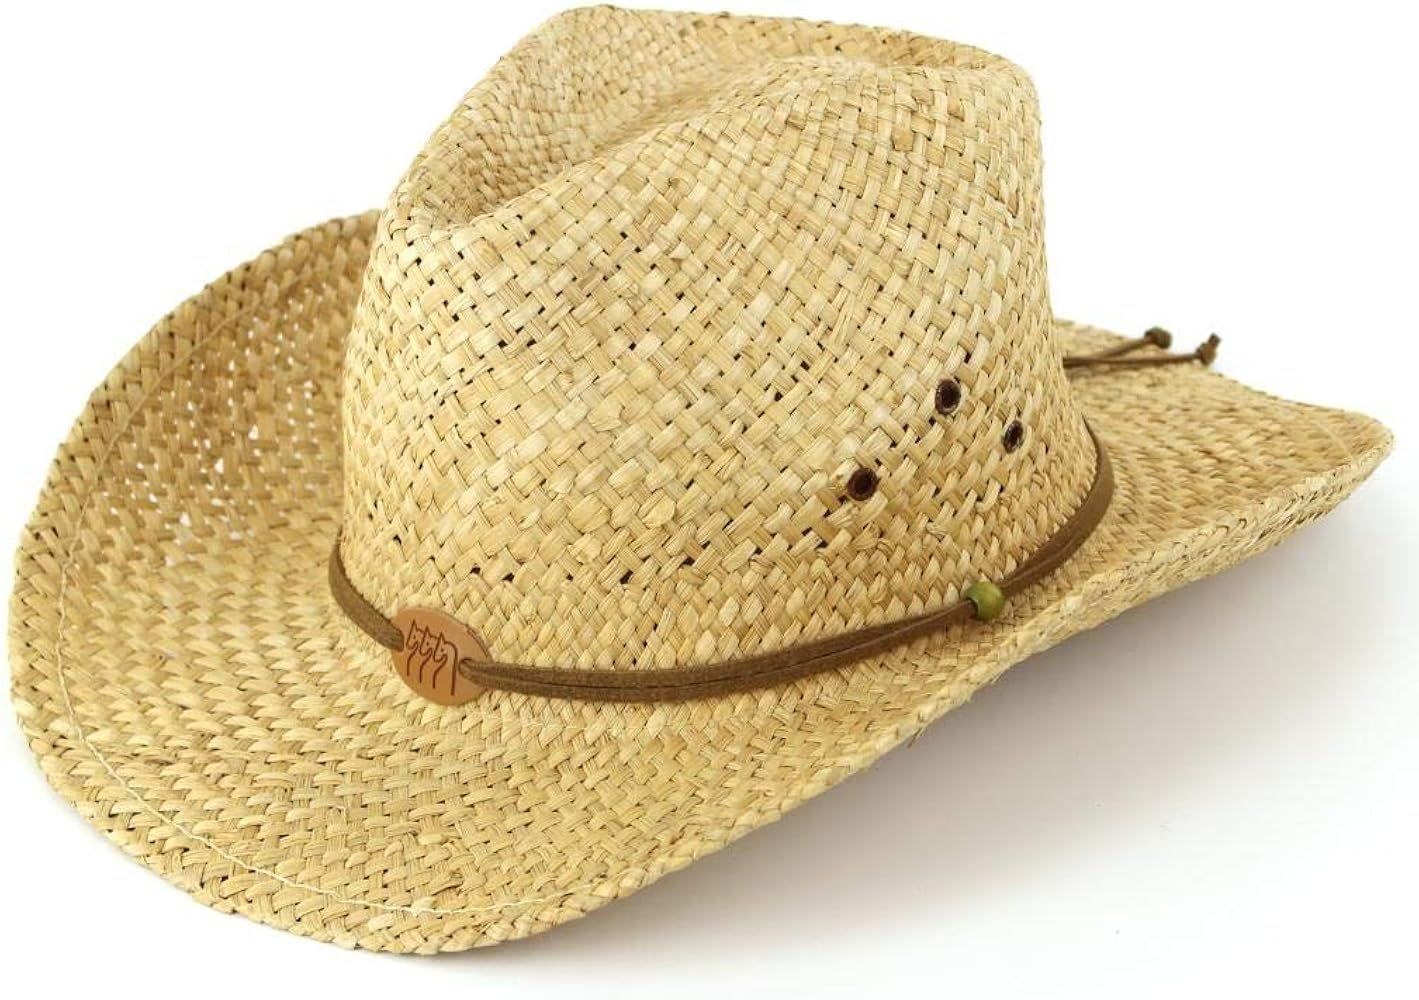 Straw cowboy hat with leather band detail and three horses badge. Natural | Amazon (UK)